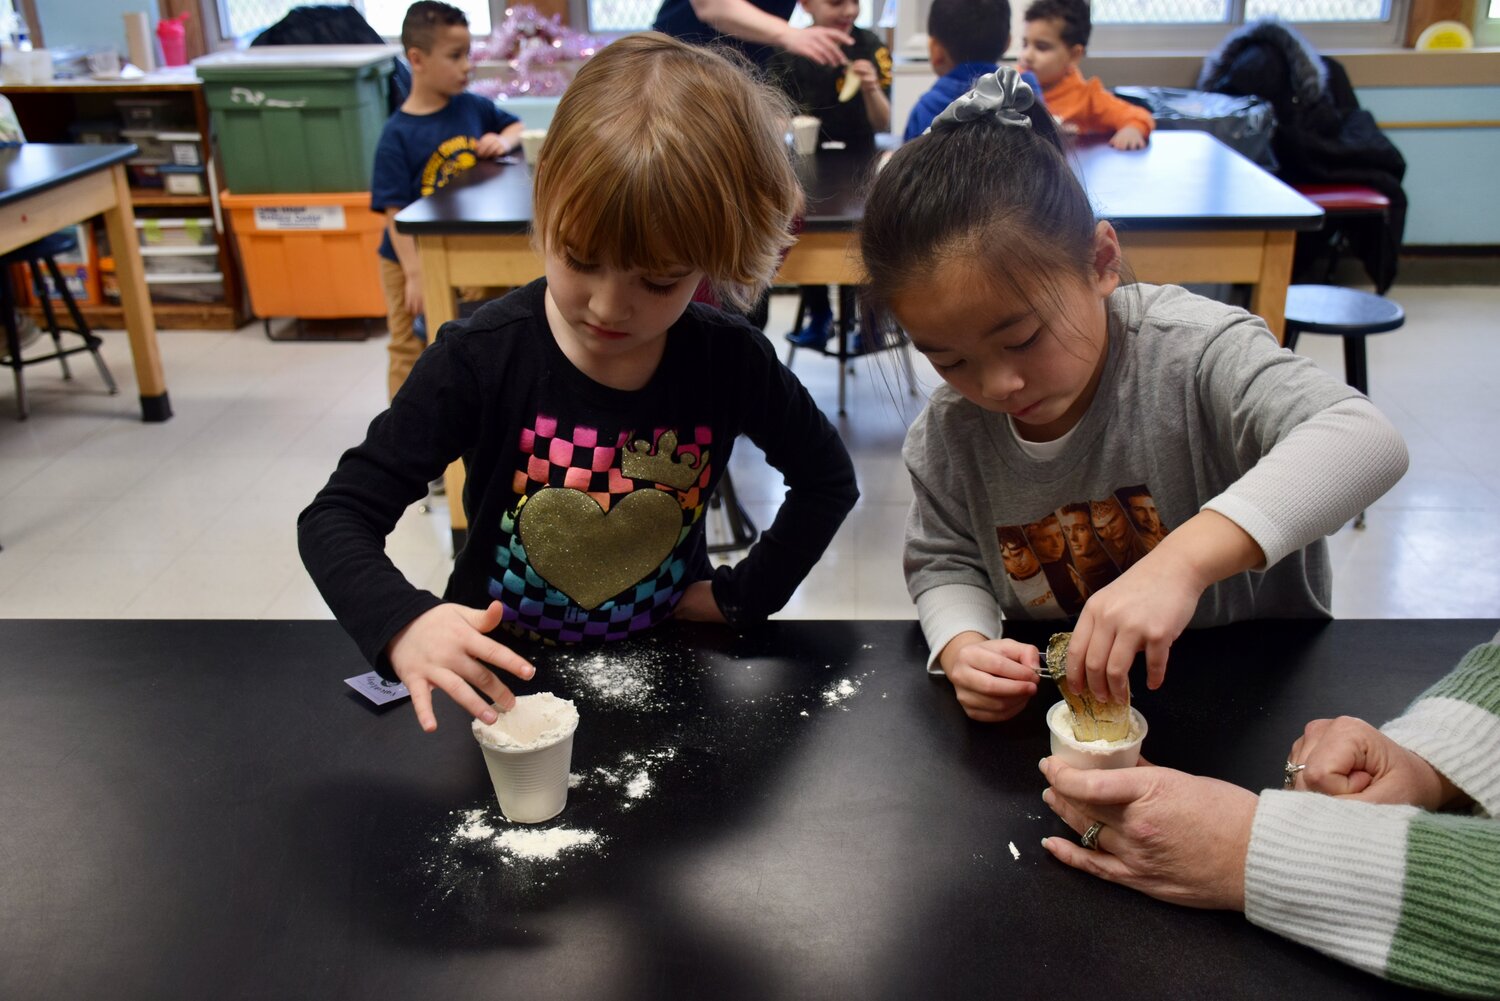 Students create dinosaur tooth replicas to take home at Franklin Square’s John Street School between Jan. 29 and Feb. 2.